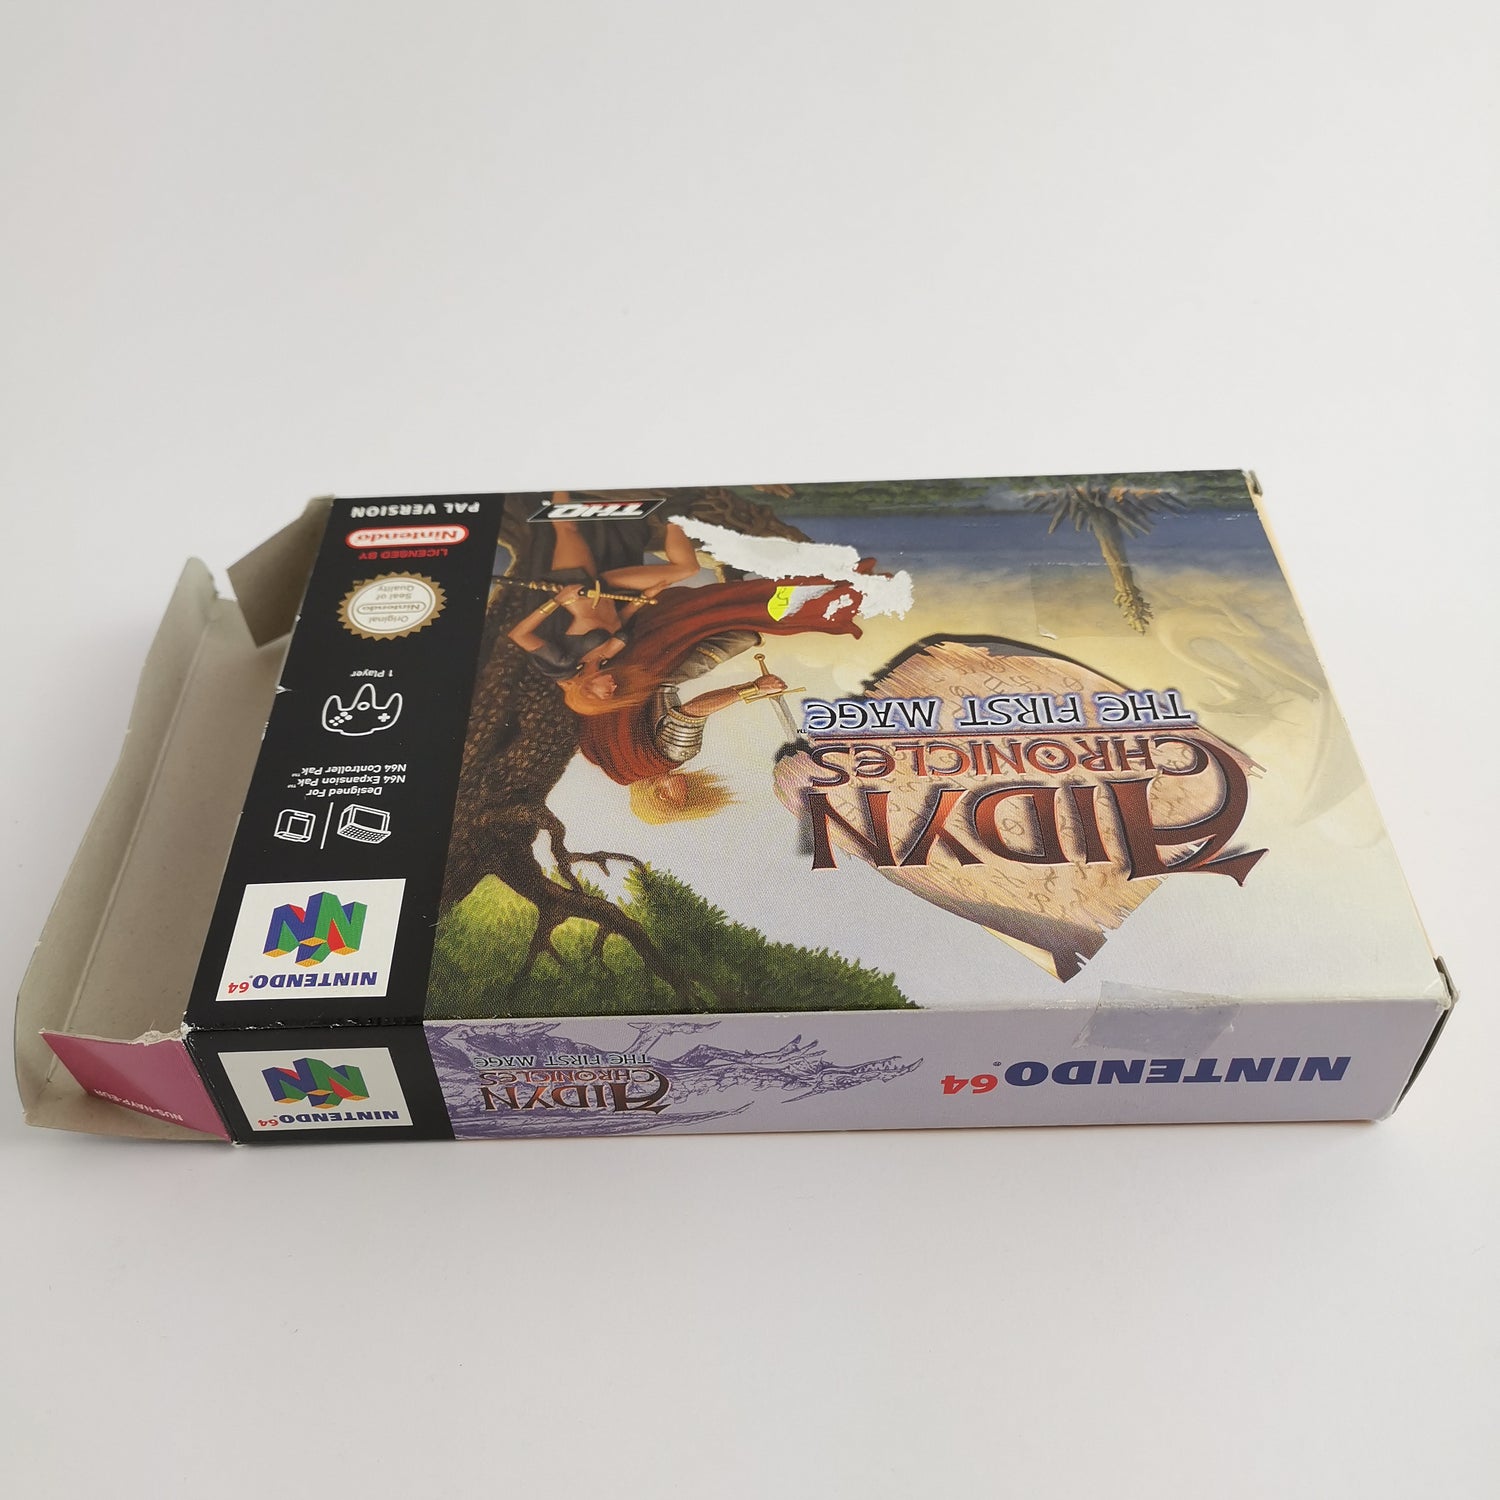 Nintendo 64 Spiel : Aidyn Chronicles The First Mage | N64 - OVP PAL Version